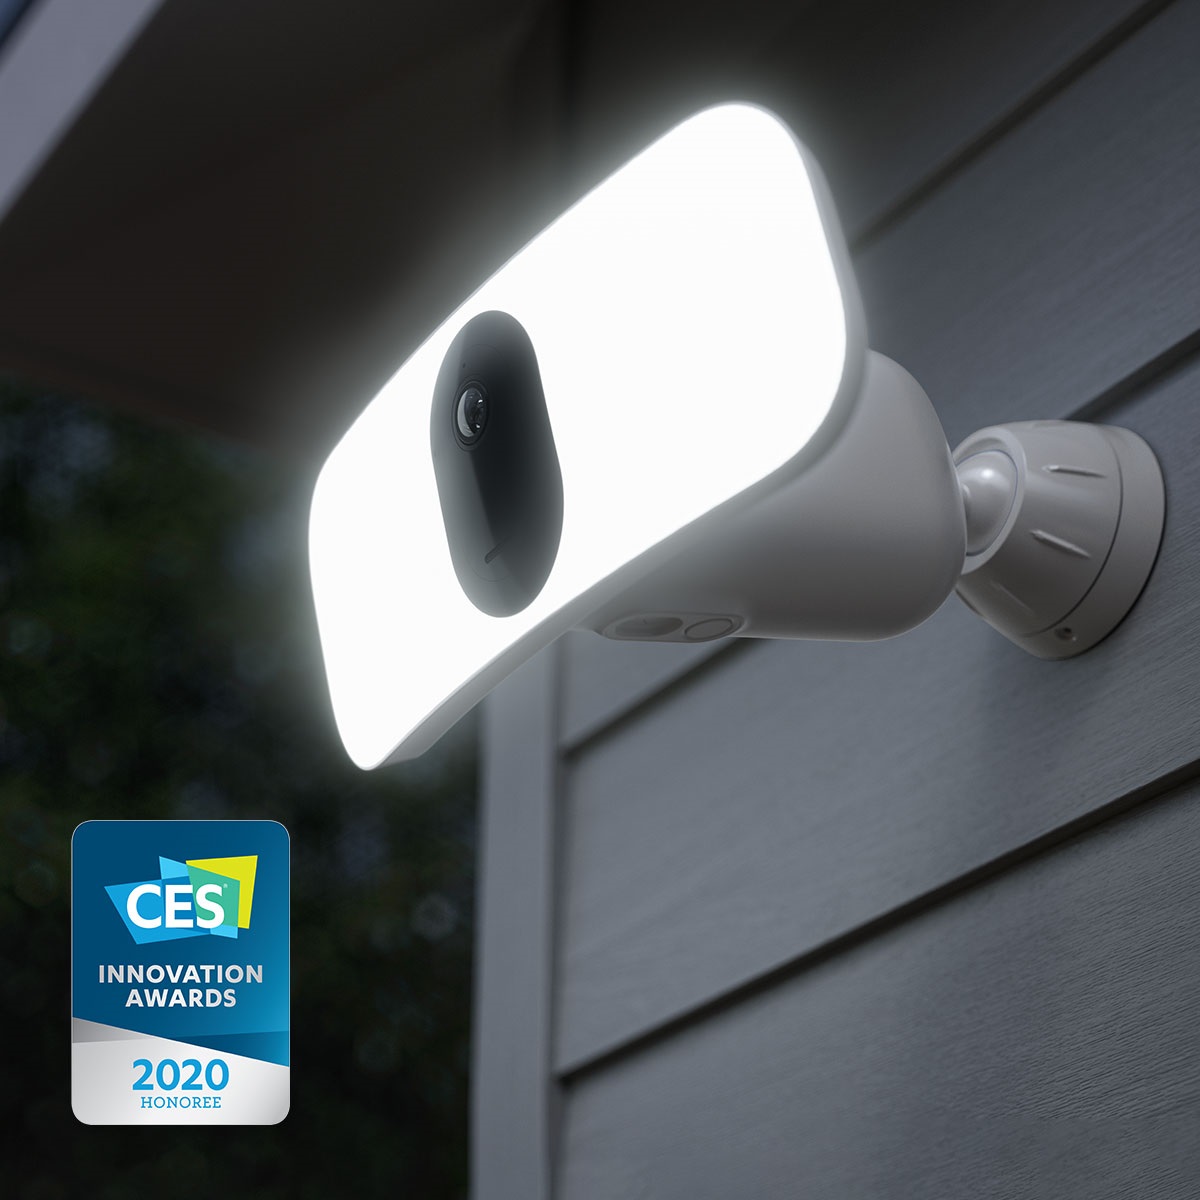 Arlo Pro 3 Floodlight Camera unveiled at CES